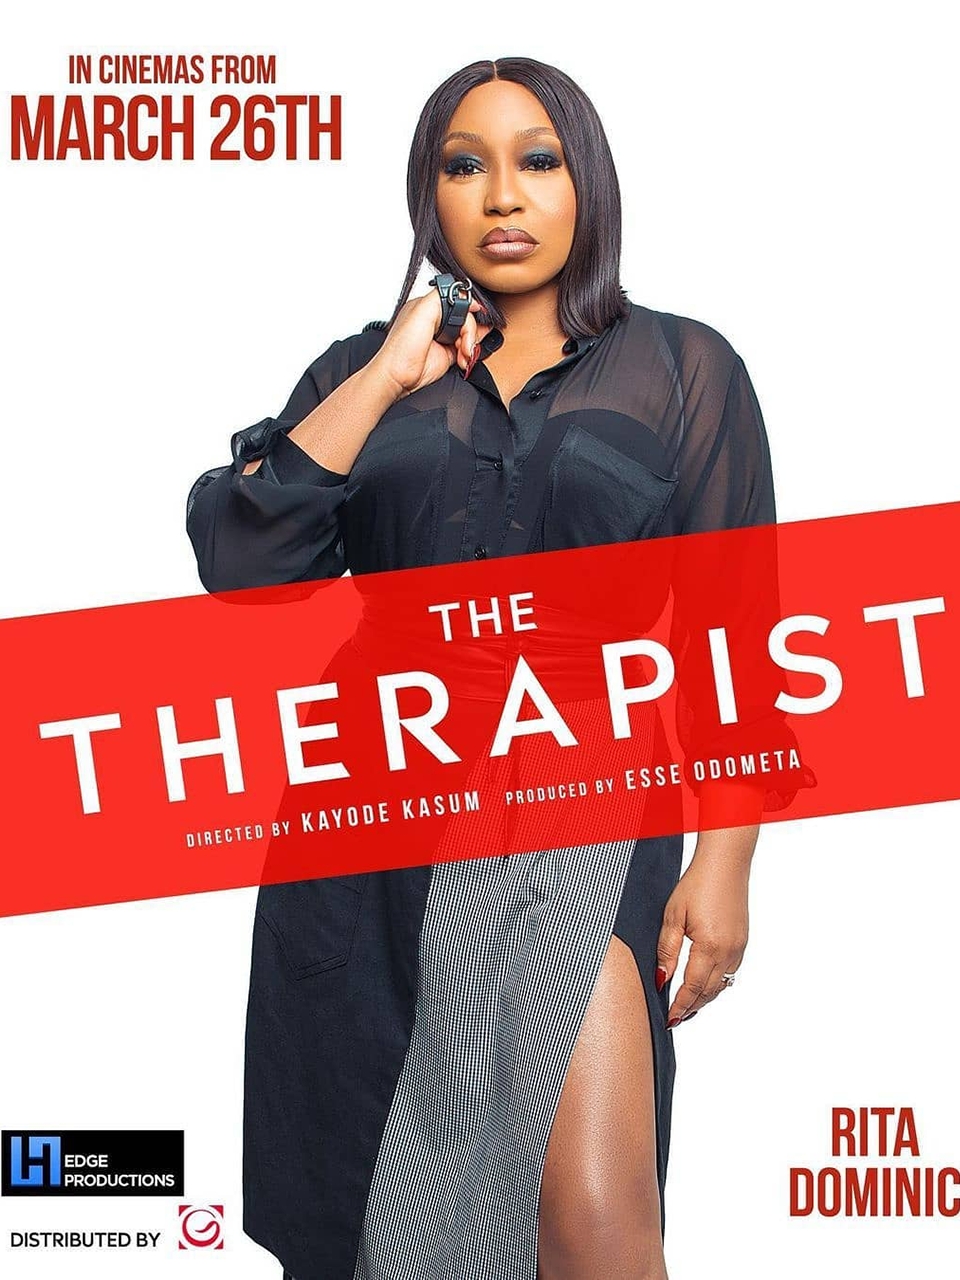 Meet the Nollywood cast at the private screening of The therapist movie.